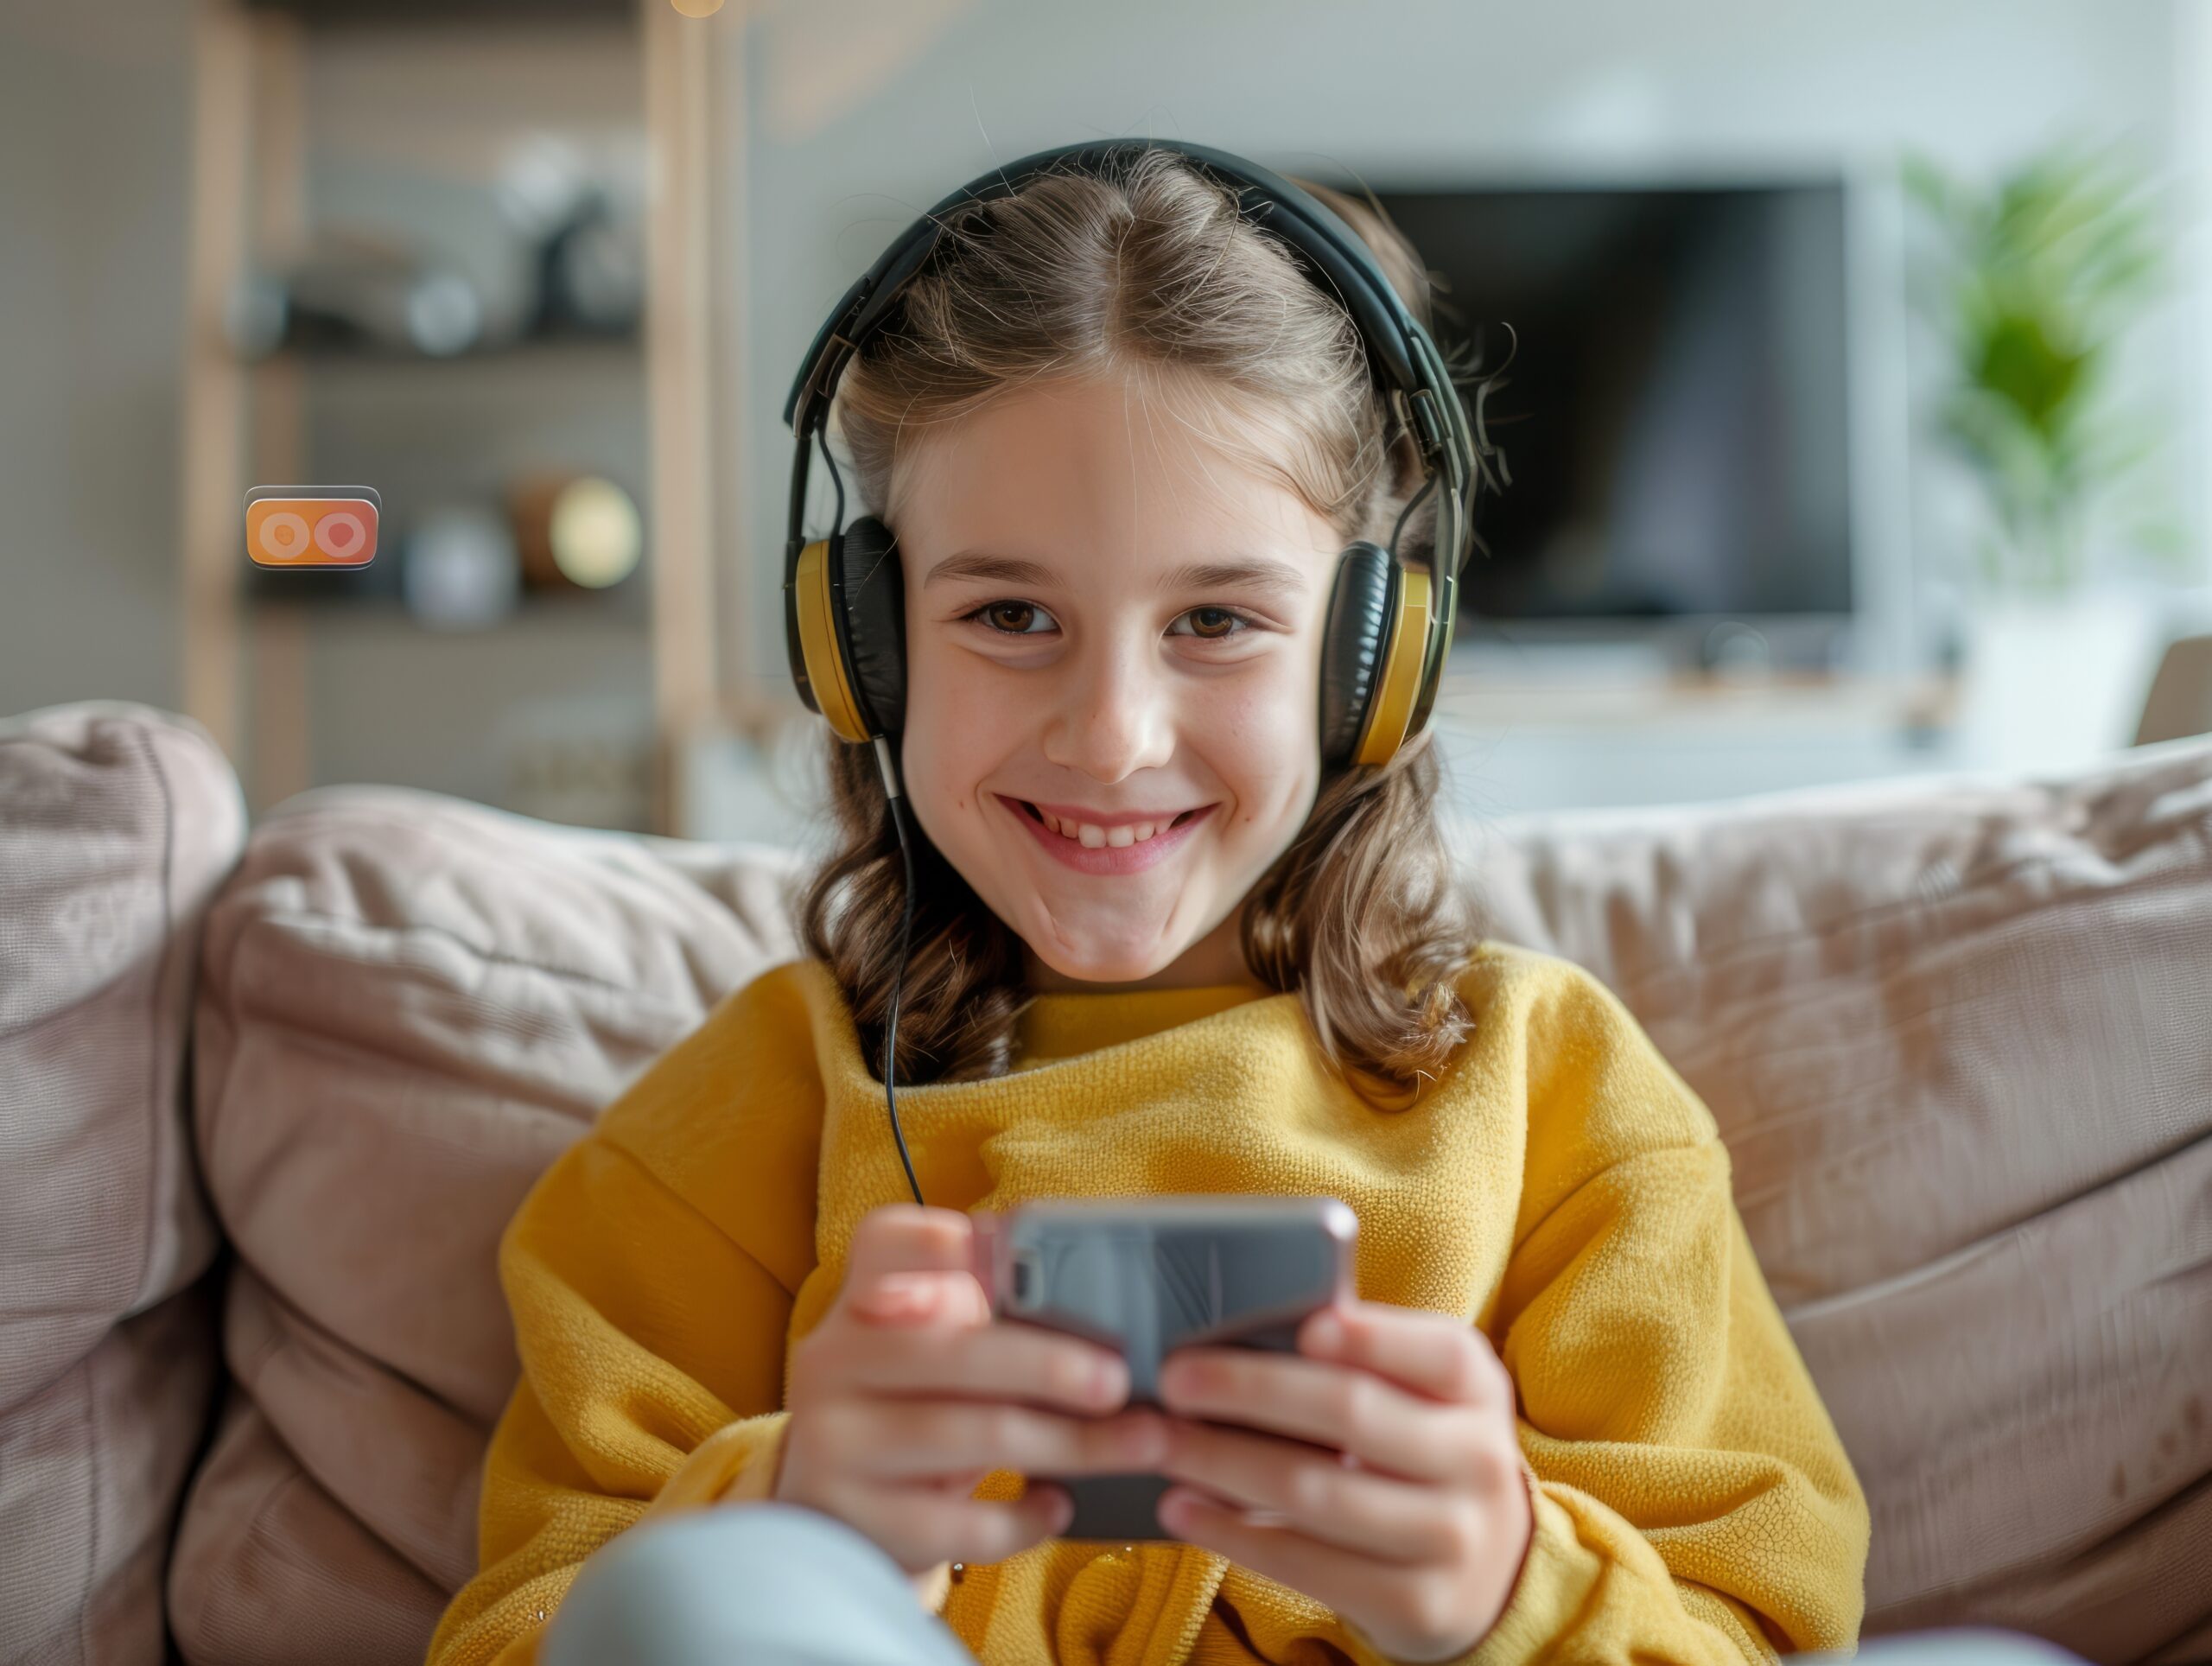 Happy smile Preteen girl kid using a smartphone and headphones for online learning, app social media, or playing a game